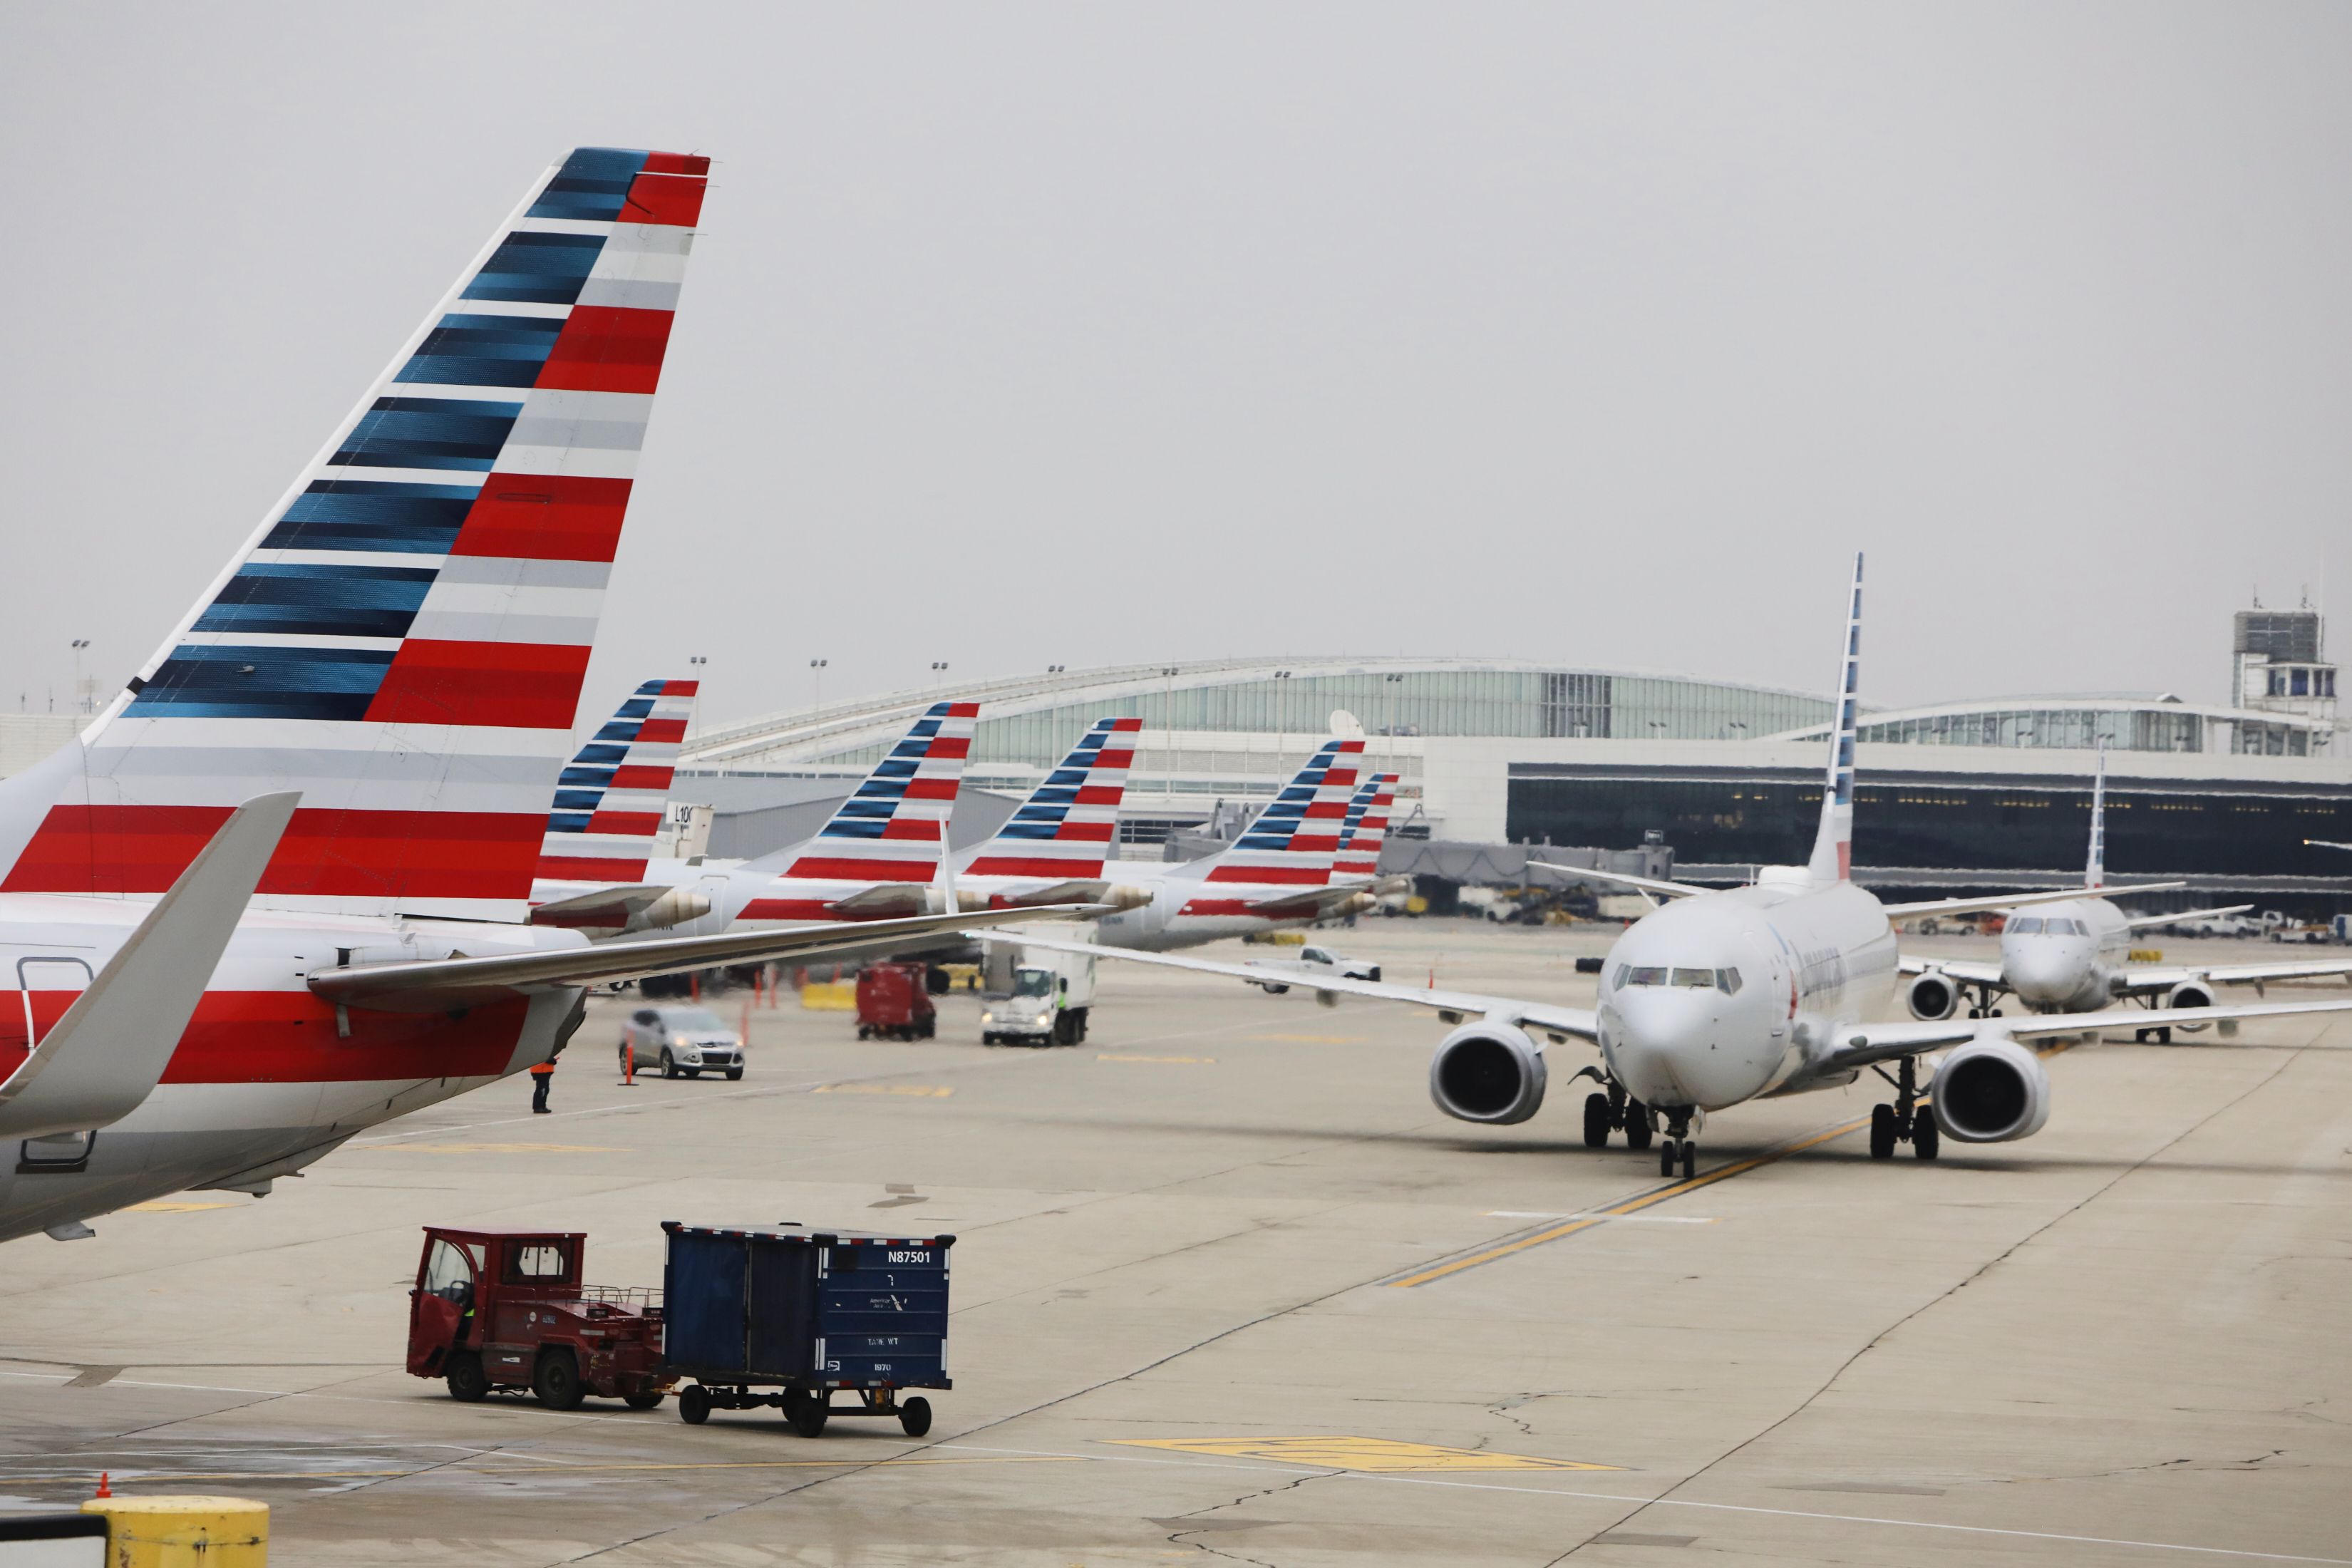 American Airlines aircraft lined up on the tarmac.